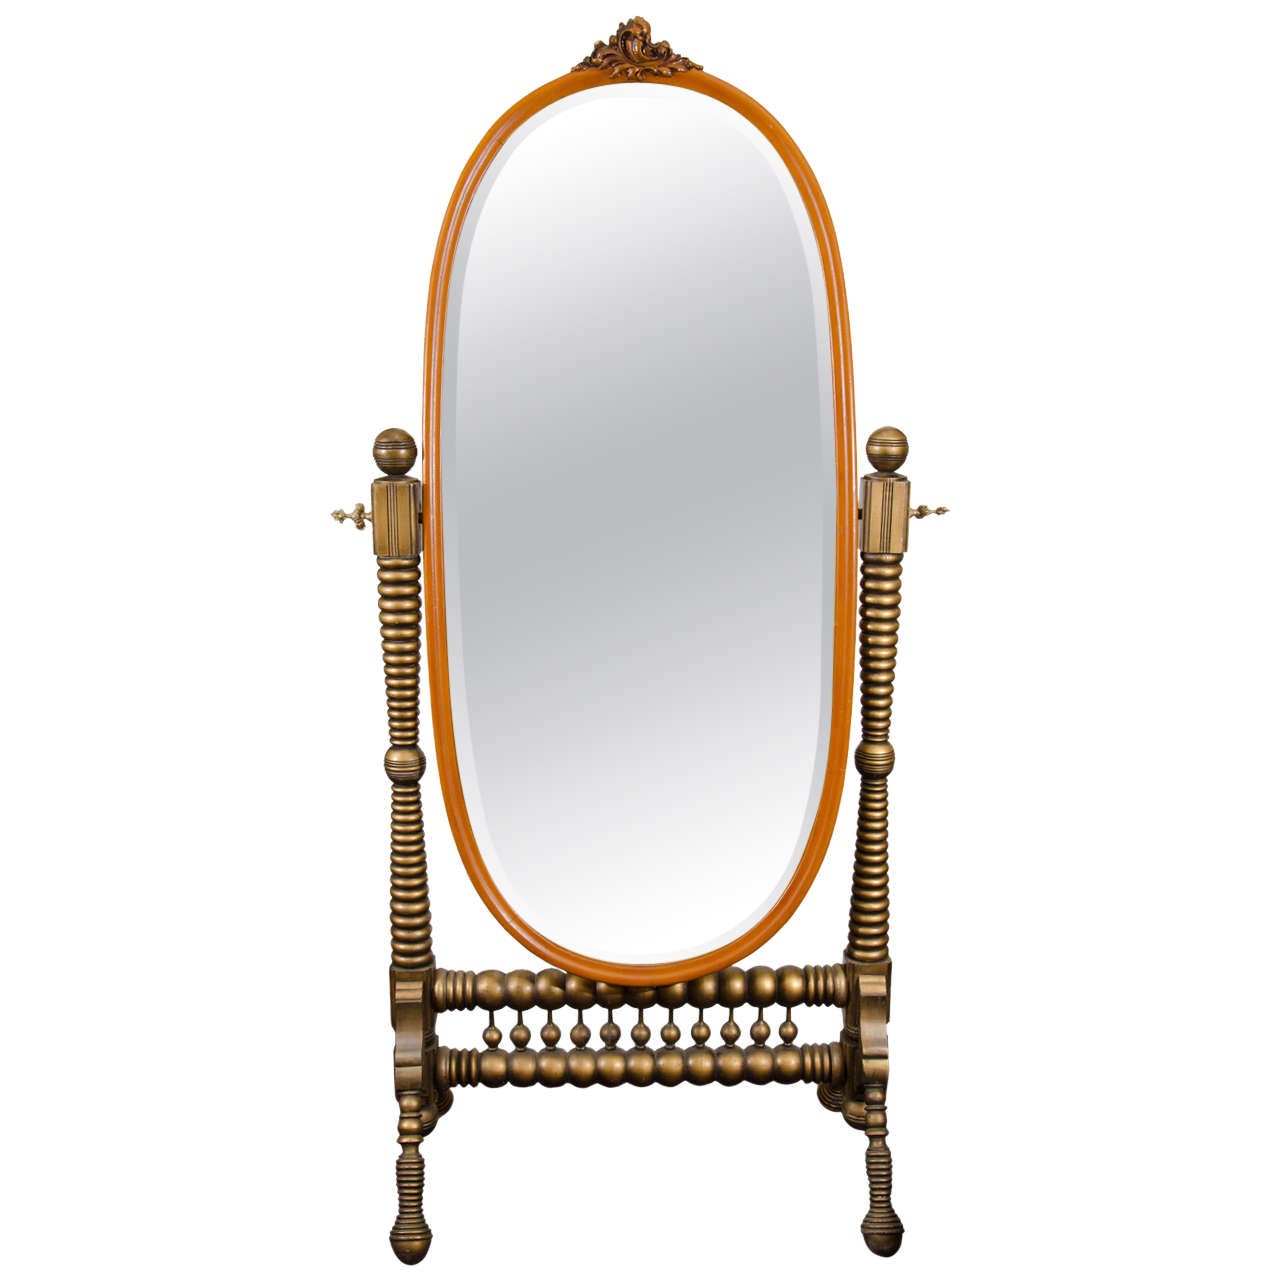 A 19th Century French Cheval Mirror with Gold Trim